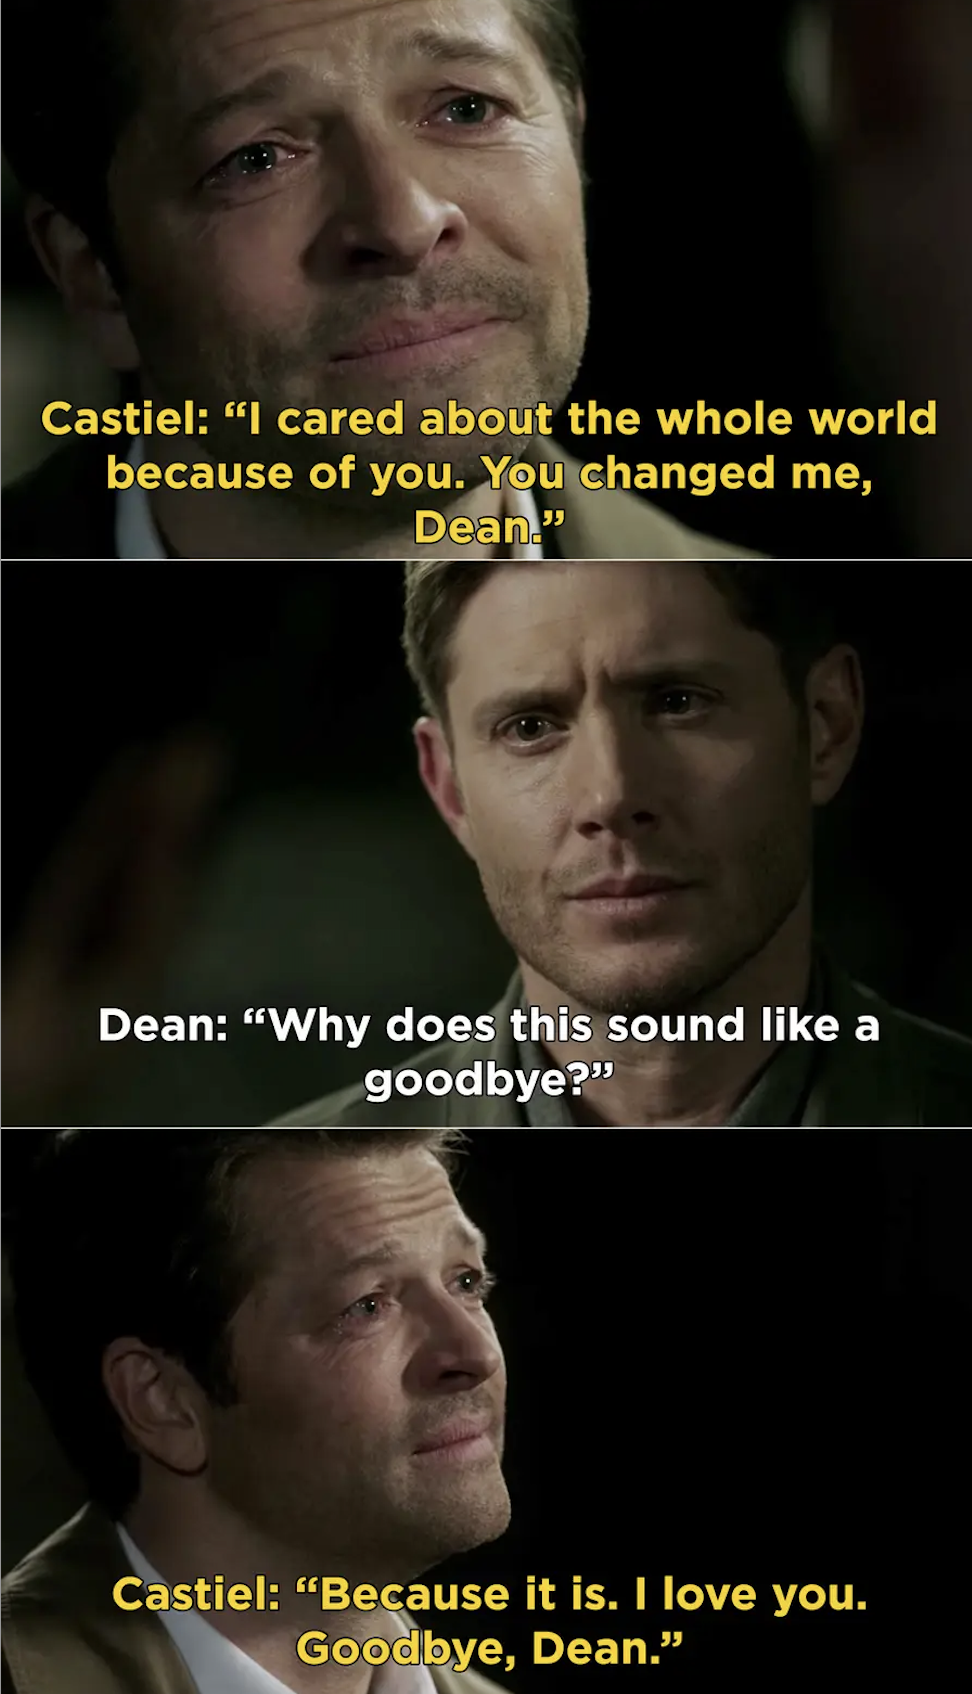 Castiel: &quot;I cared about the whole world because of you. You changed me, Dean&quot; Dean: &quot;Why does this sound like a goodbye?&quot; Castiel: &quot;Because it is. I love you, goodbye, dean.&quot;